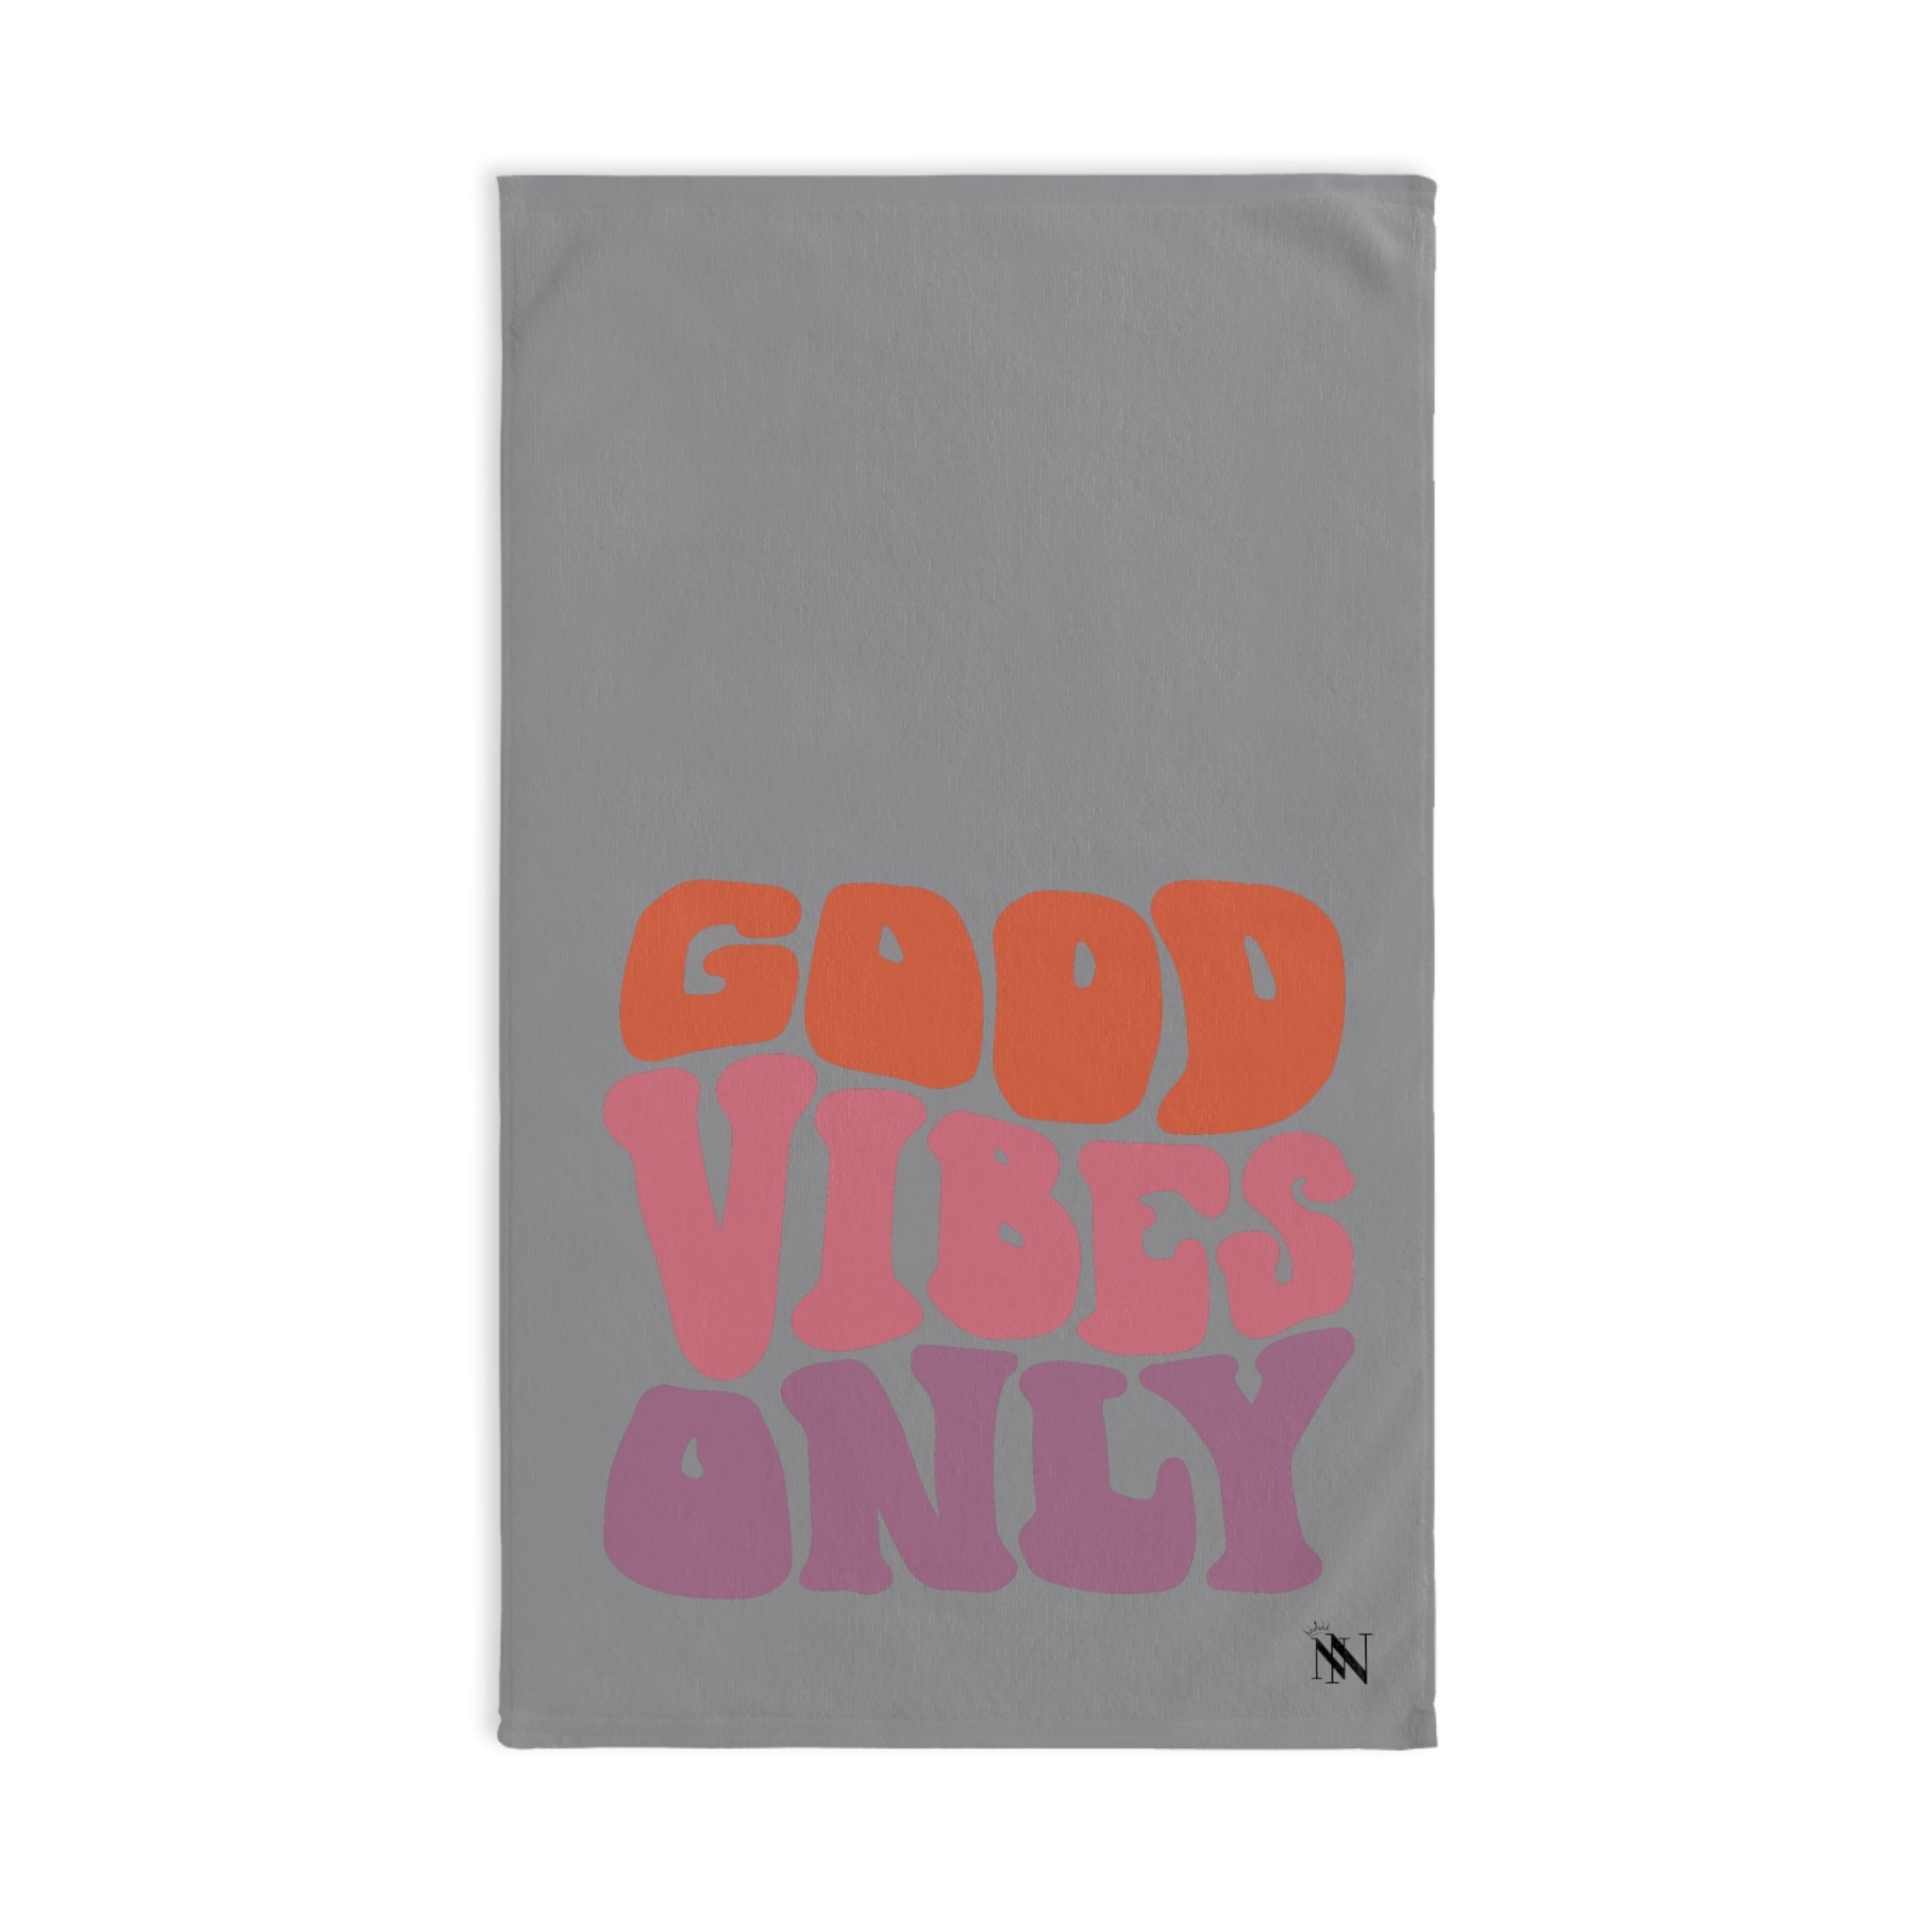 Only Vibes Good Grey | Anniversary Wedding, Christmas, Valentines Day, Birthday Gifts for Him, Her, Romantic Gifts for Wife, Girlfriend, Couples Gifts for Boyfriend, Husband NECTAR NAPKINS